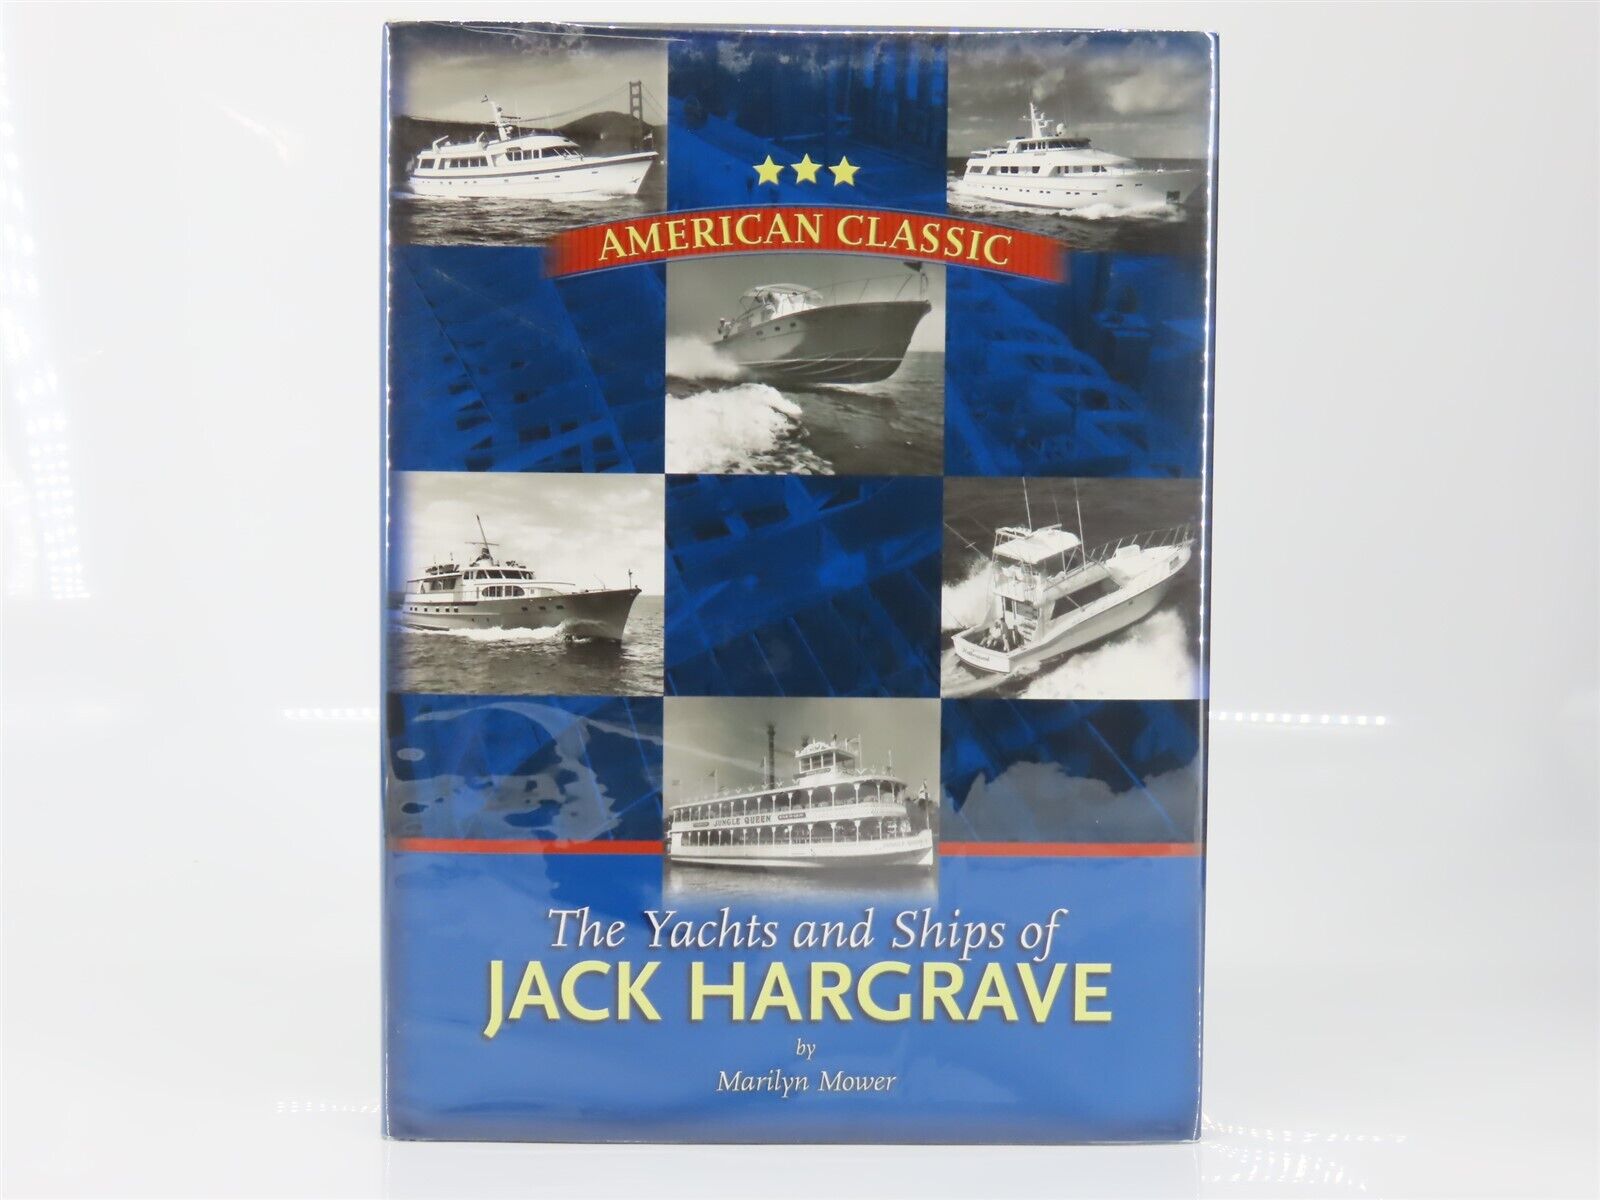 American Classic: The Yachts and Ships of Jack Hargrave by Marilyn Mower ©2004 